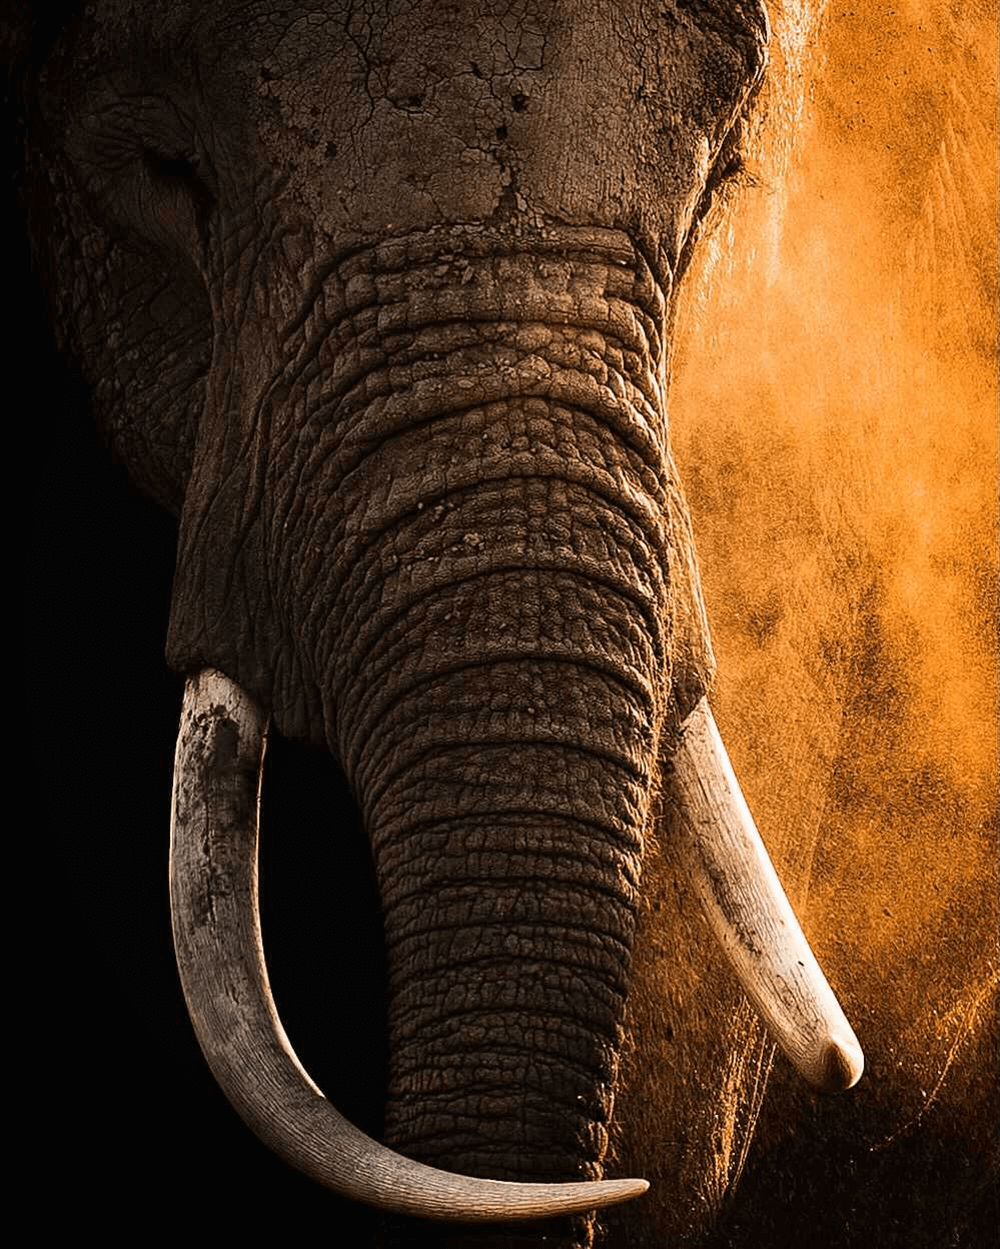 Wildlife photography by @hshphotos